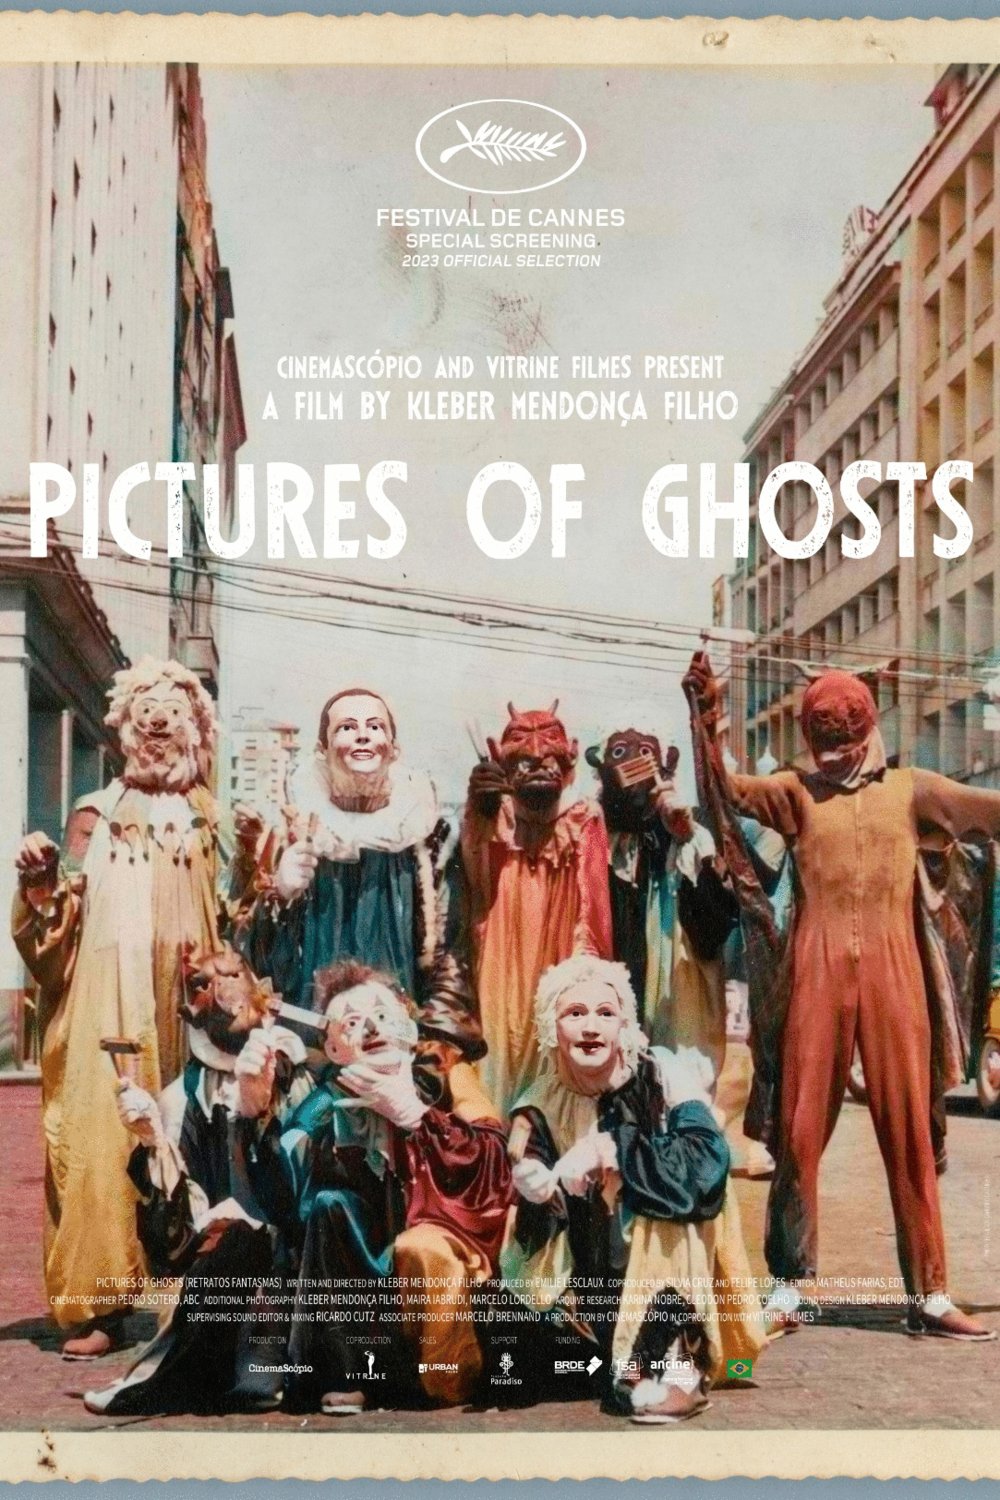 L'affiche du film Pictures of Ghosts